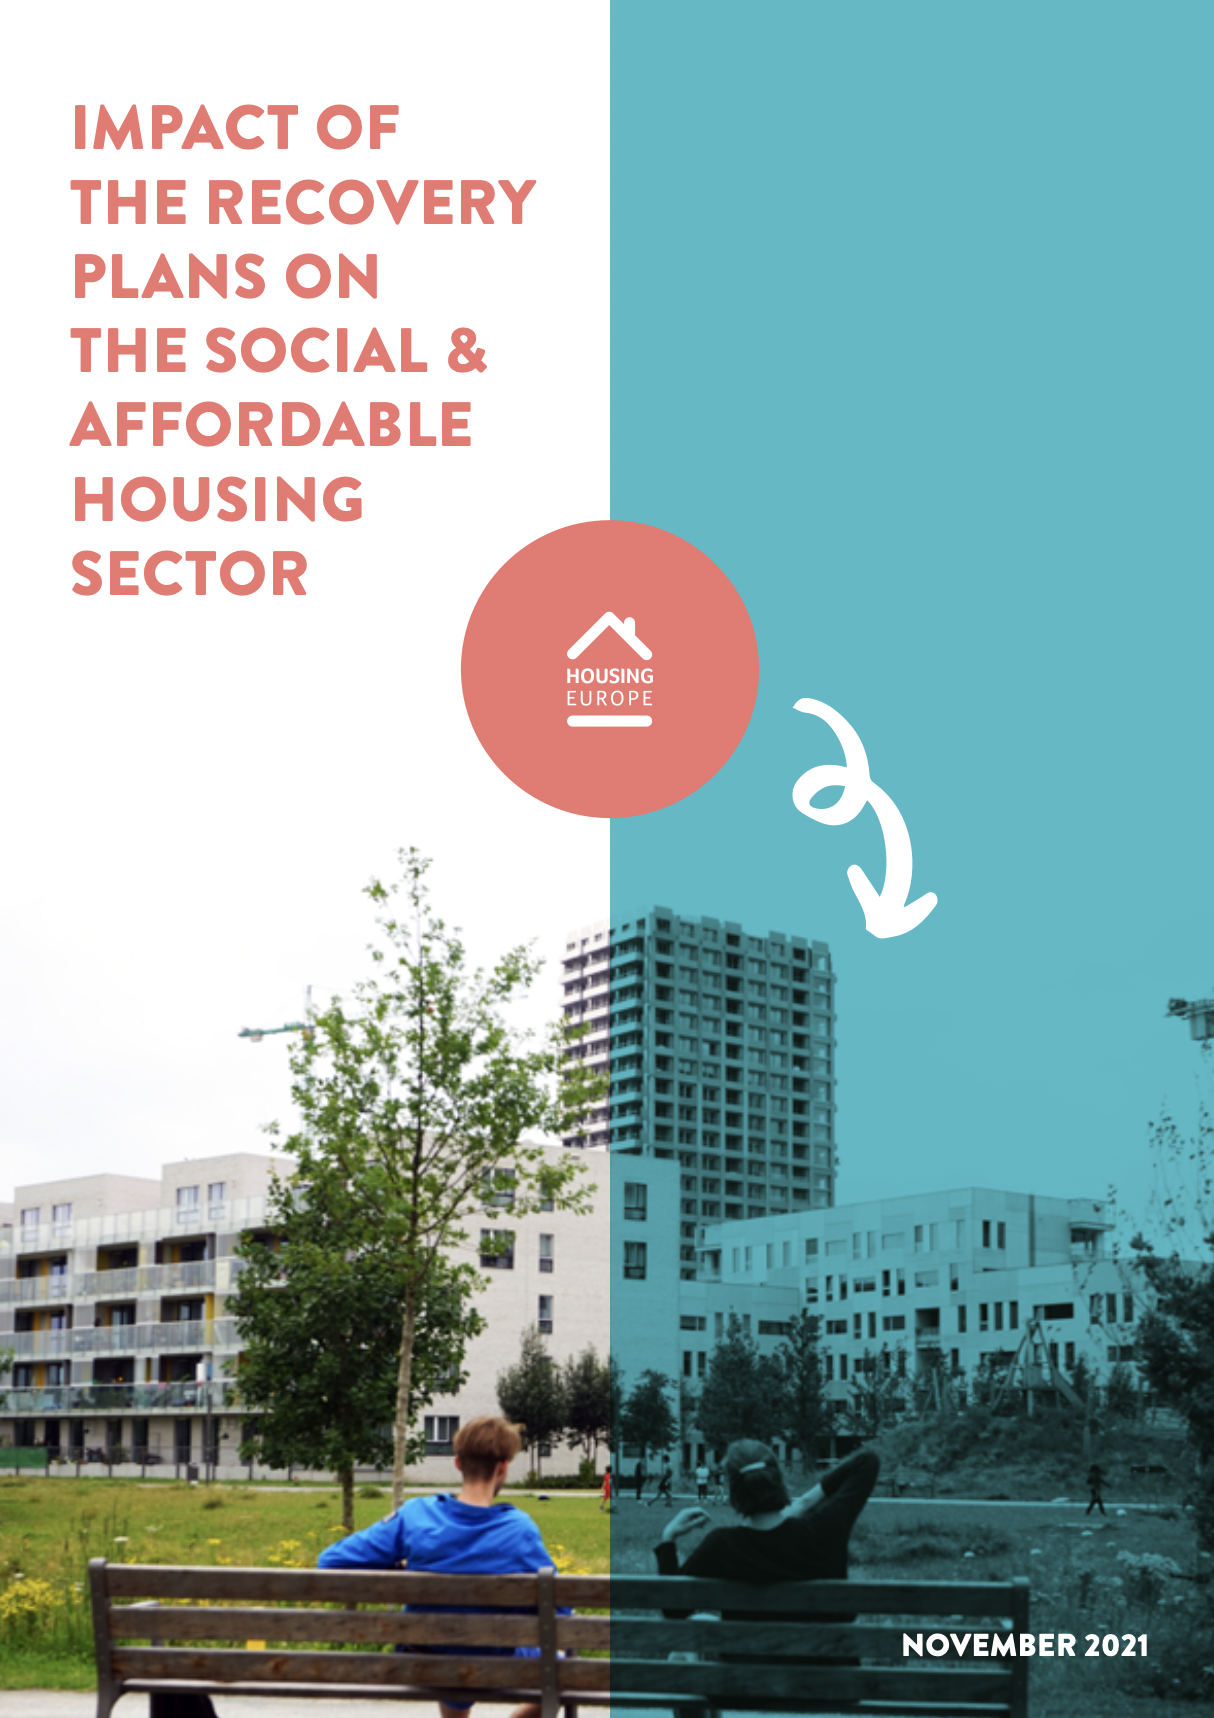 Impact of the Recovery Plans on the Social and Affordable Housing Sector